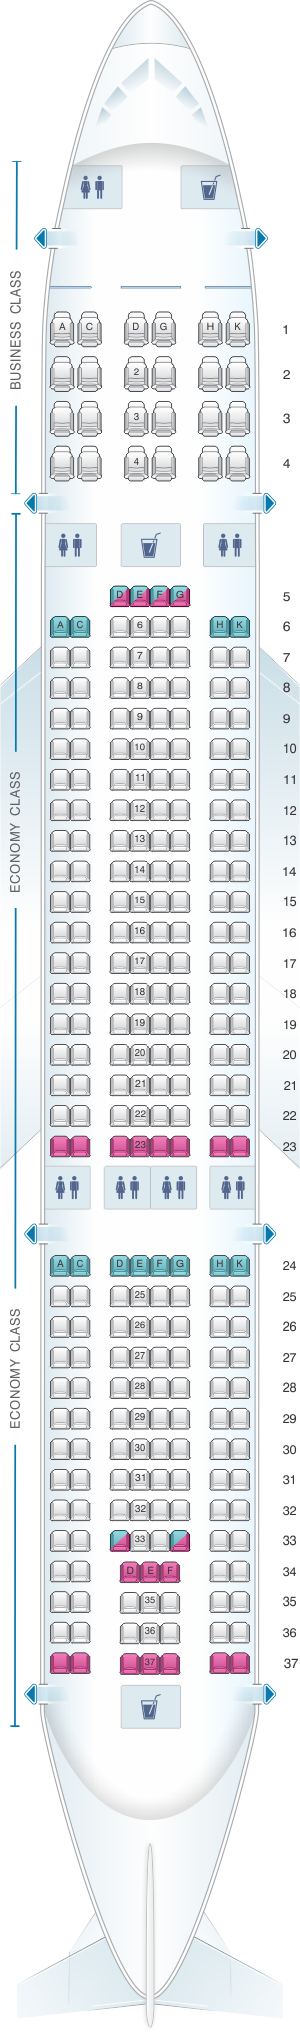 Vietnam Airlines A350 Seat Map